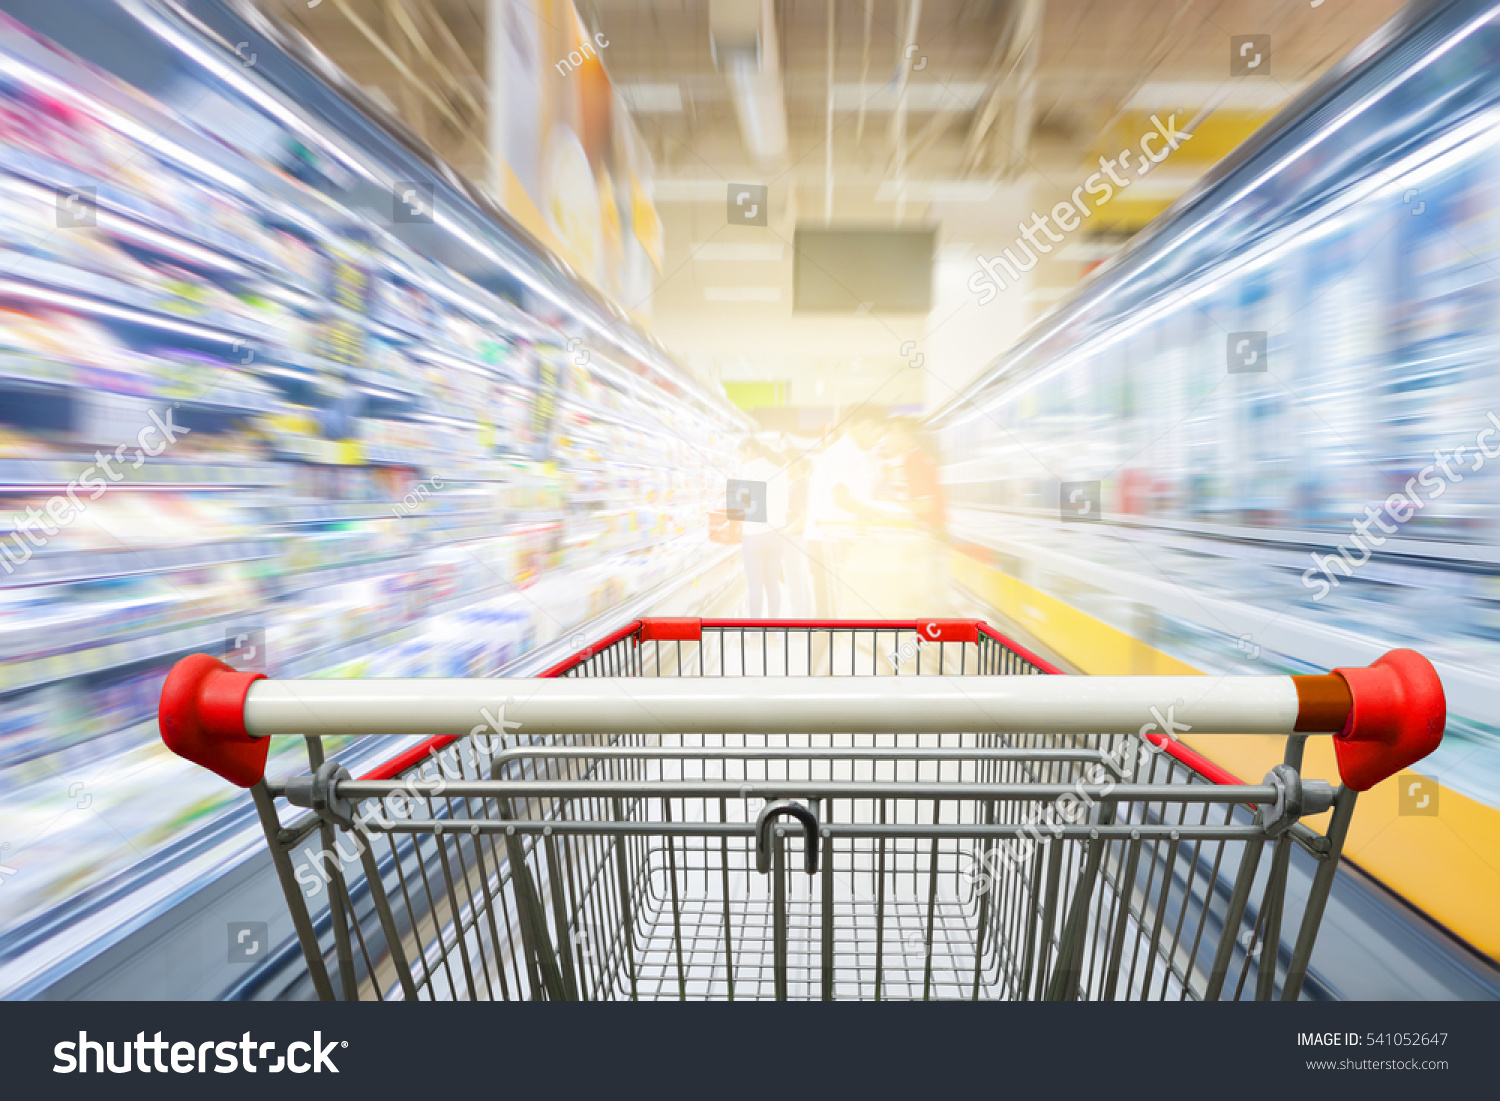 Supermarket aisle with empty red shopping cart #541052647